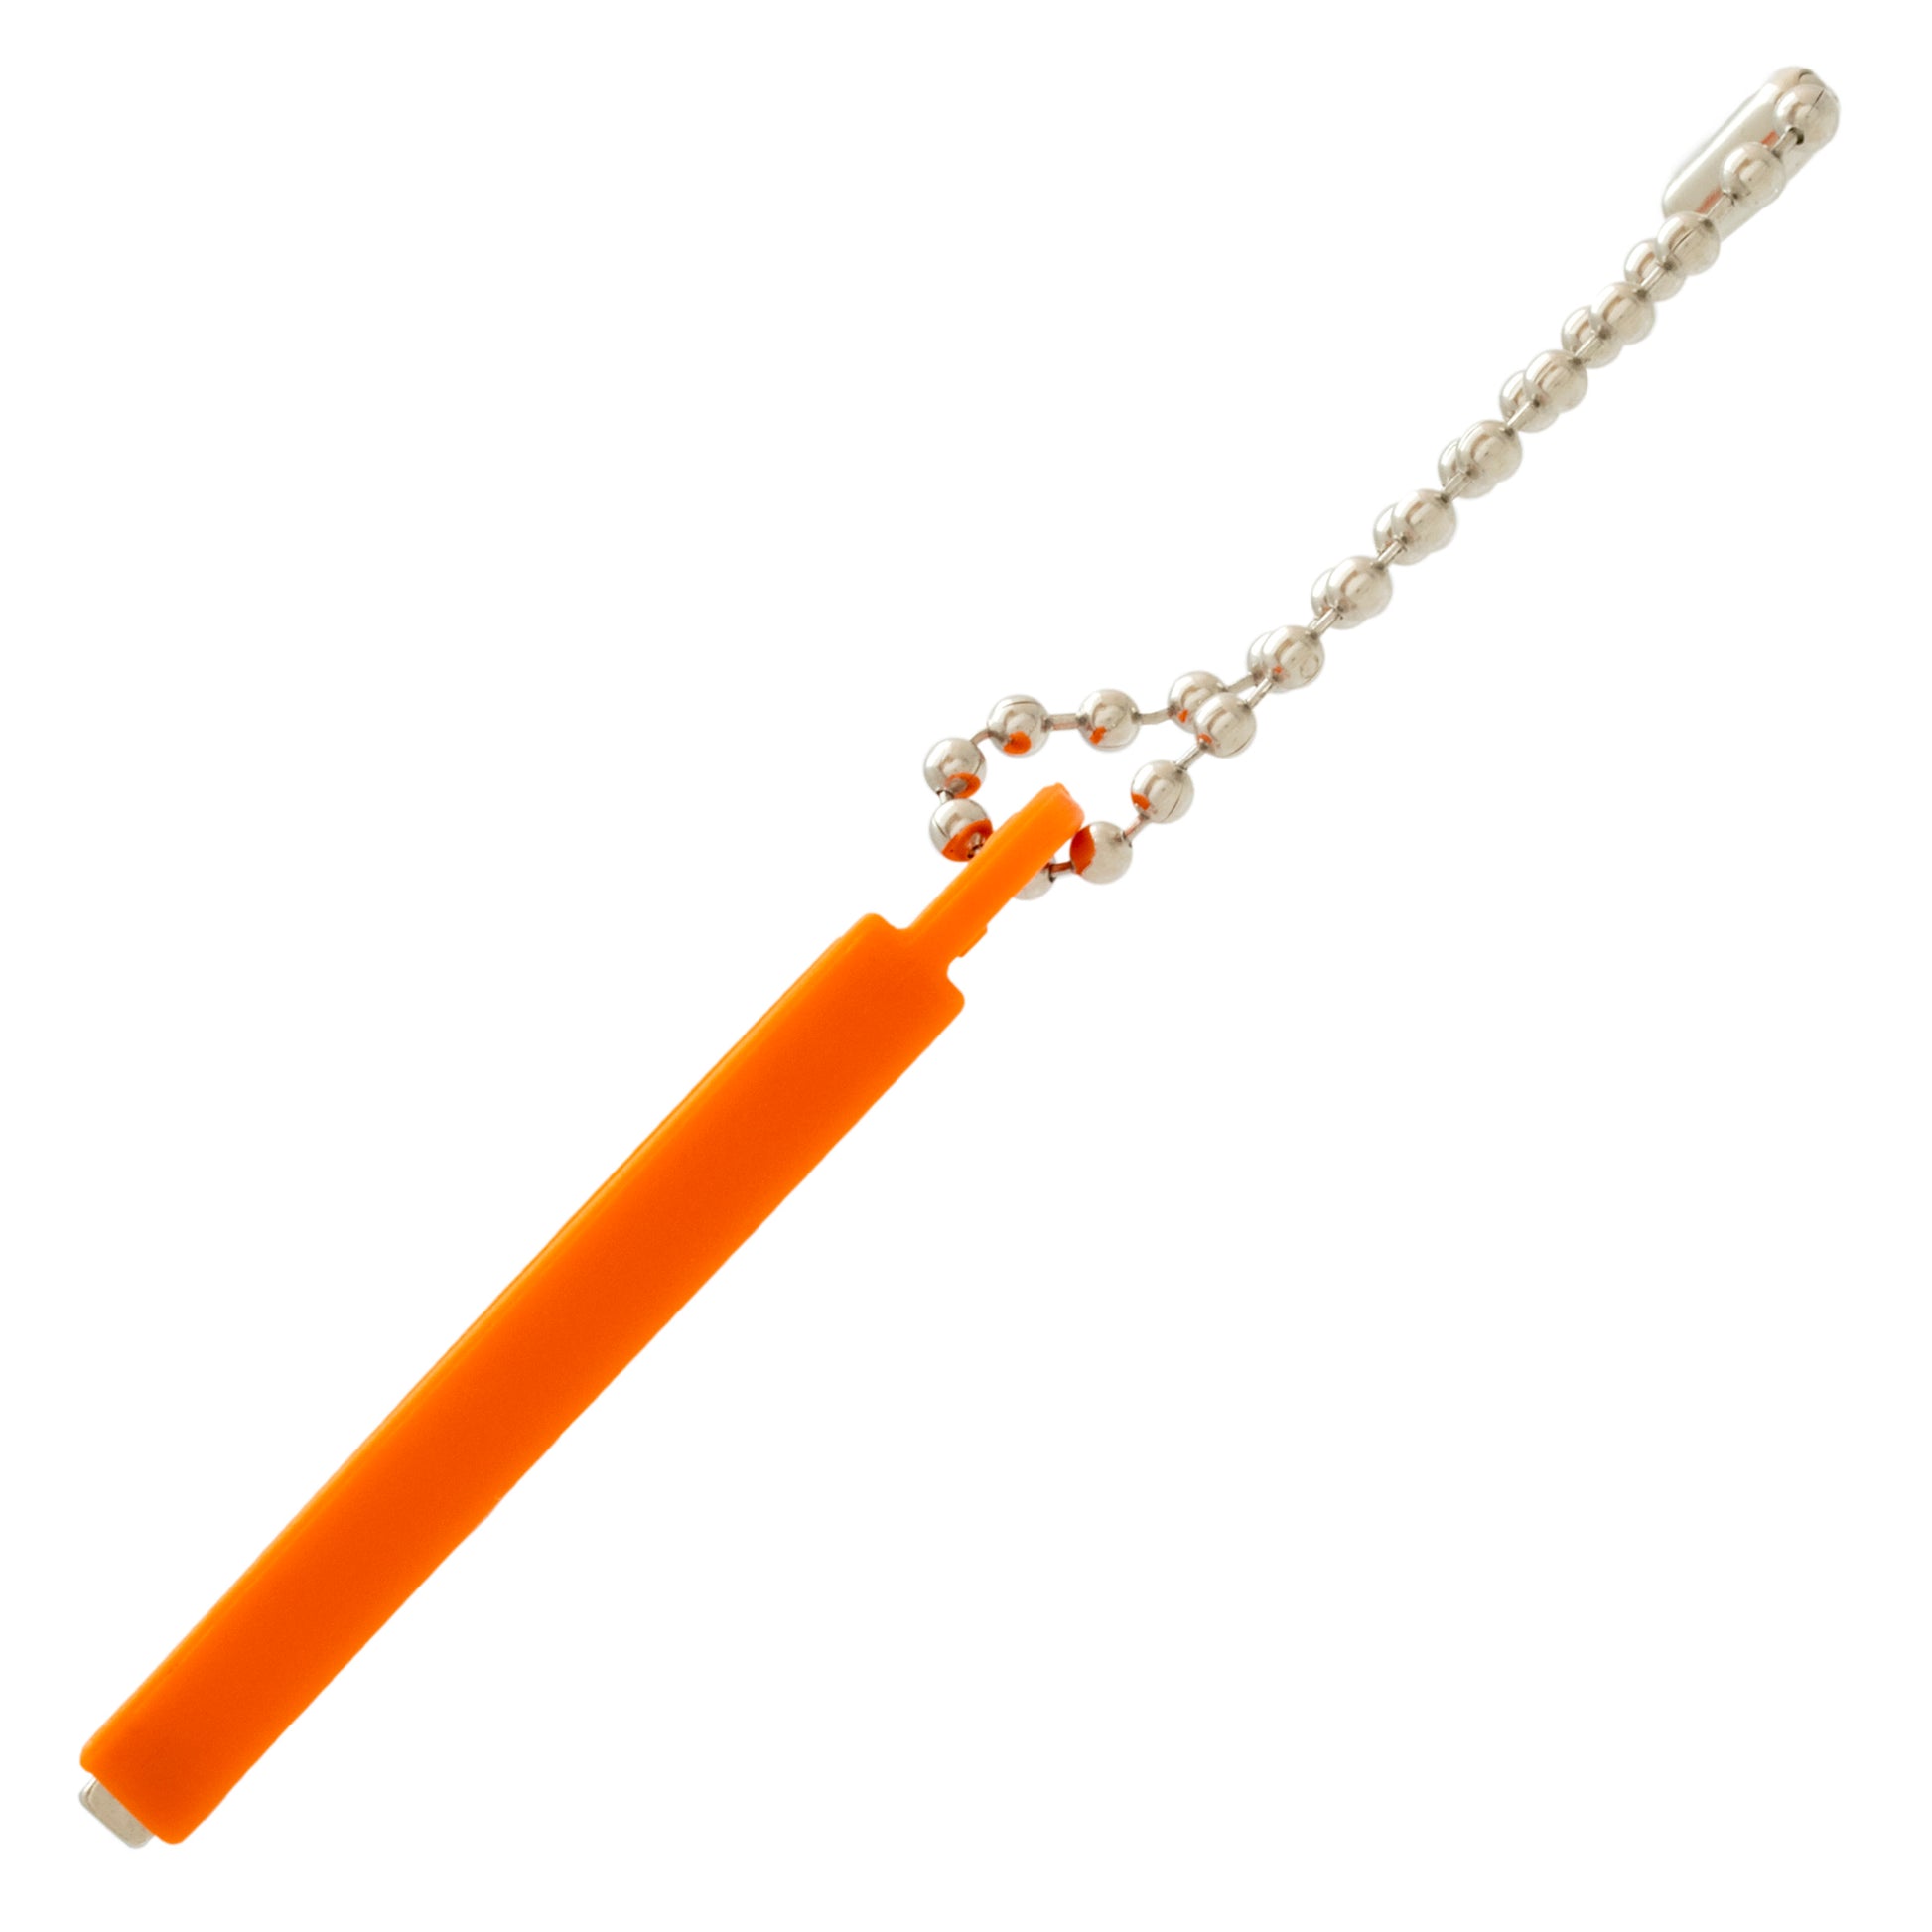 Load image into Gallery viewer, KCMO-BULK Neodymium Key Chain Magnet with Logo, Orange - Side View